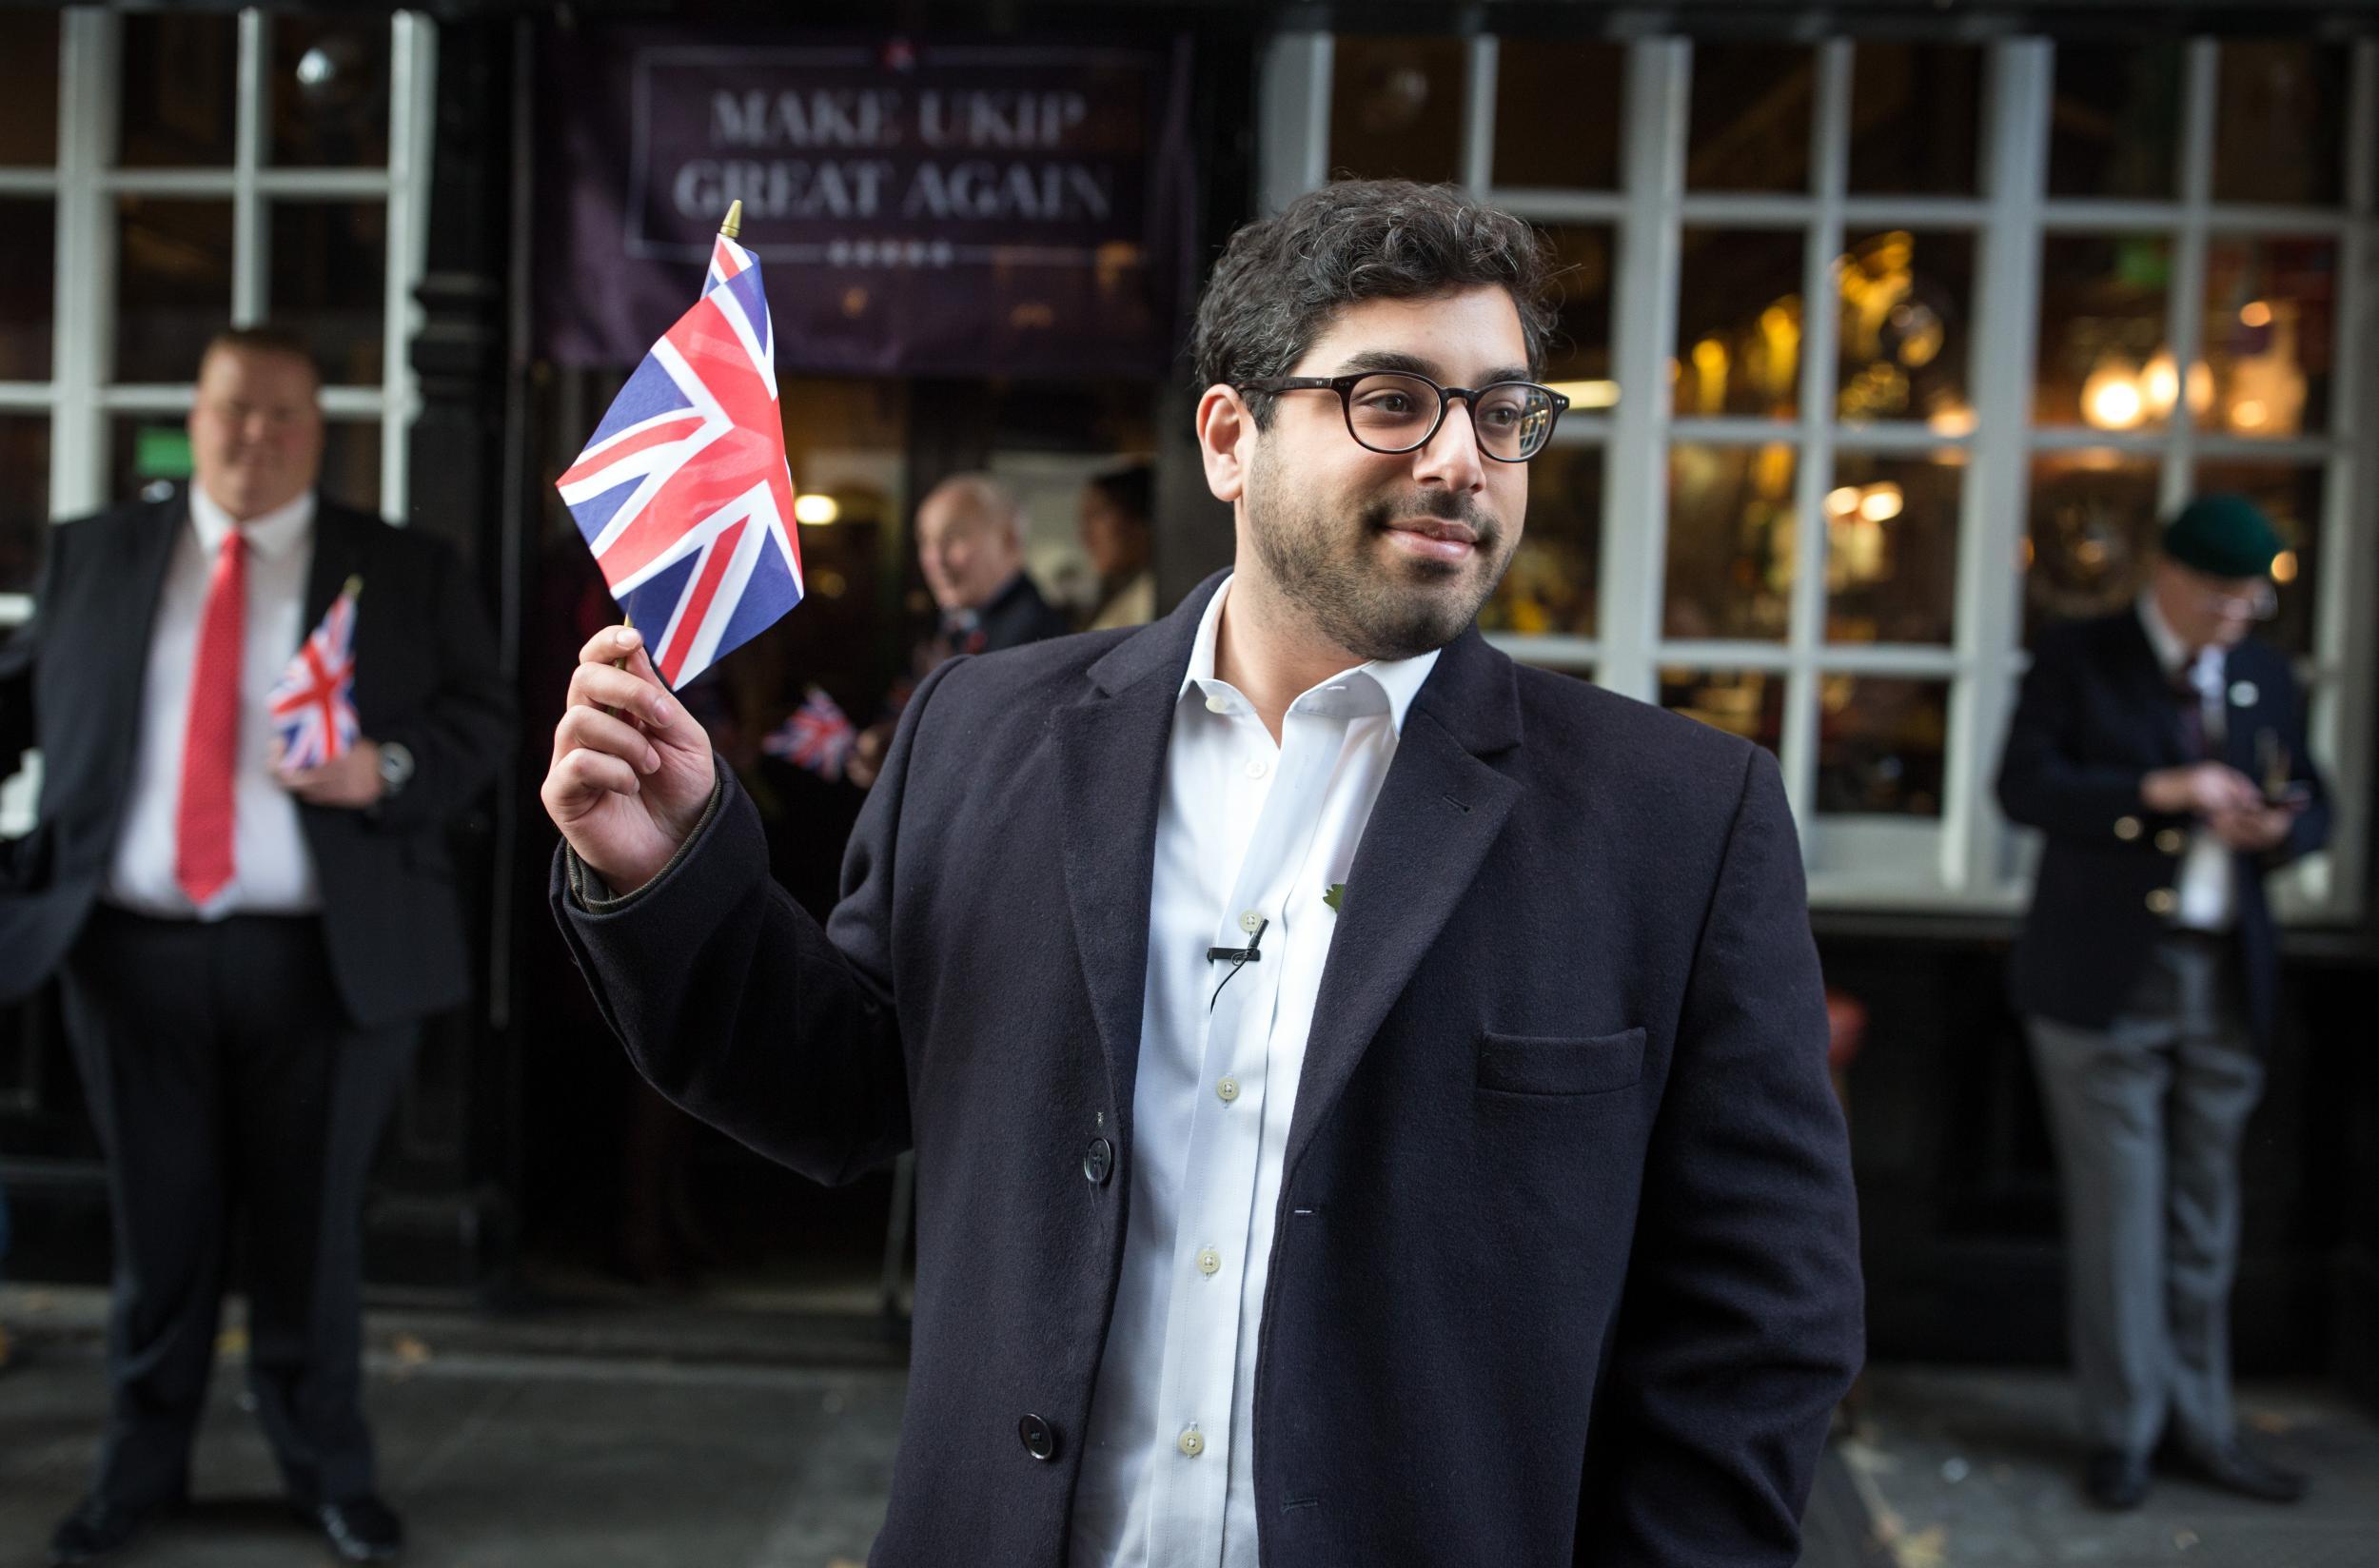 M Raheem Kassam launched his campaign from the Westminster Arms pub